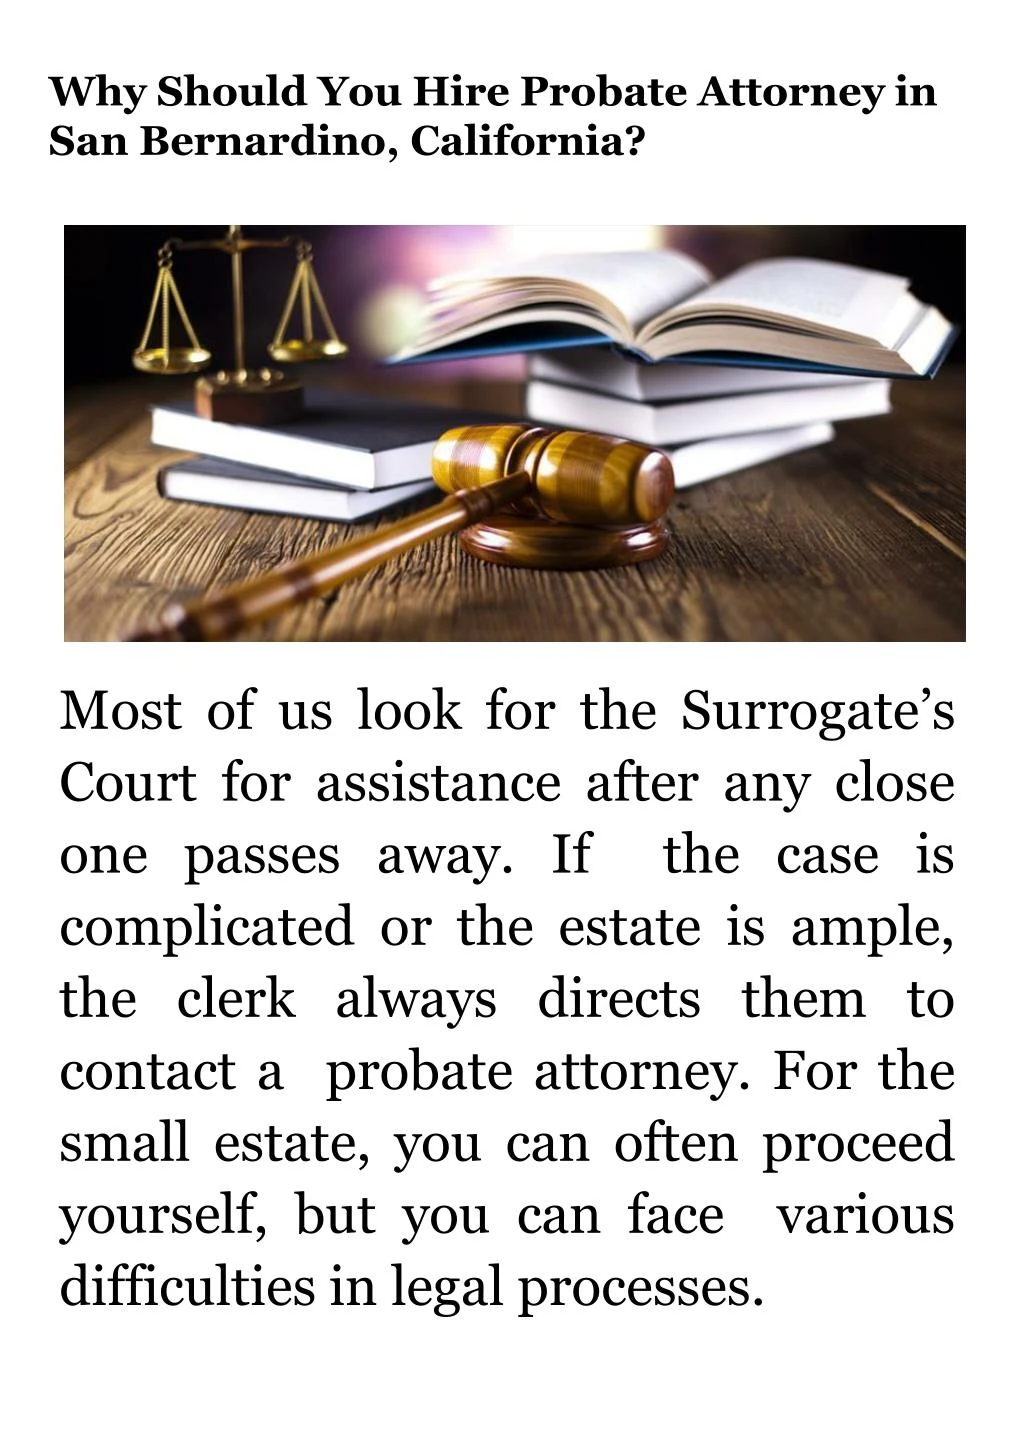 why should you hire probate attorney